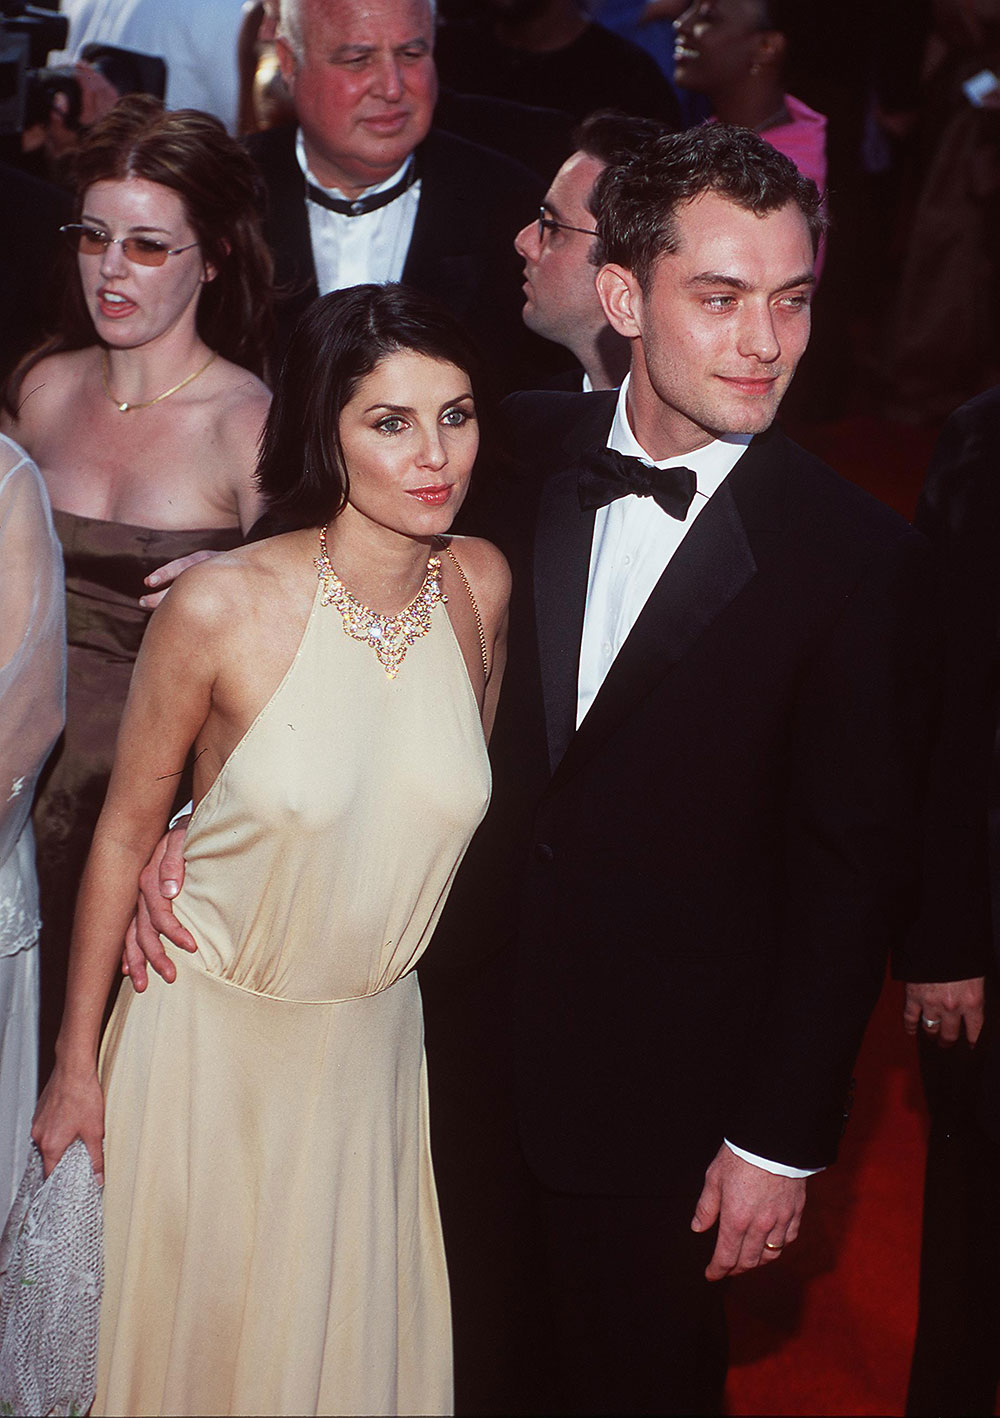 Rafferty’s rakish good looks come courtesy of dad Jude Law, pictured here with mum Sadie Frost in 1995. Photo / Getty Images